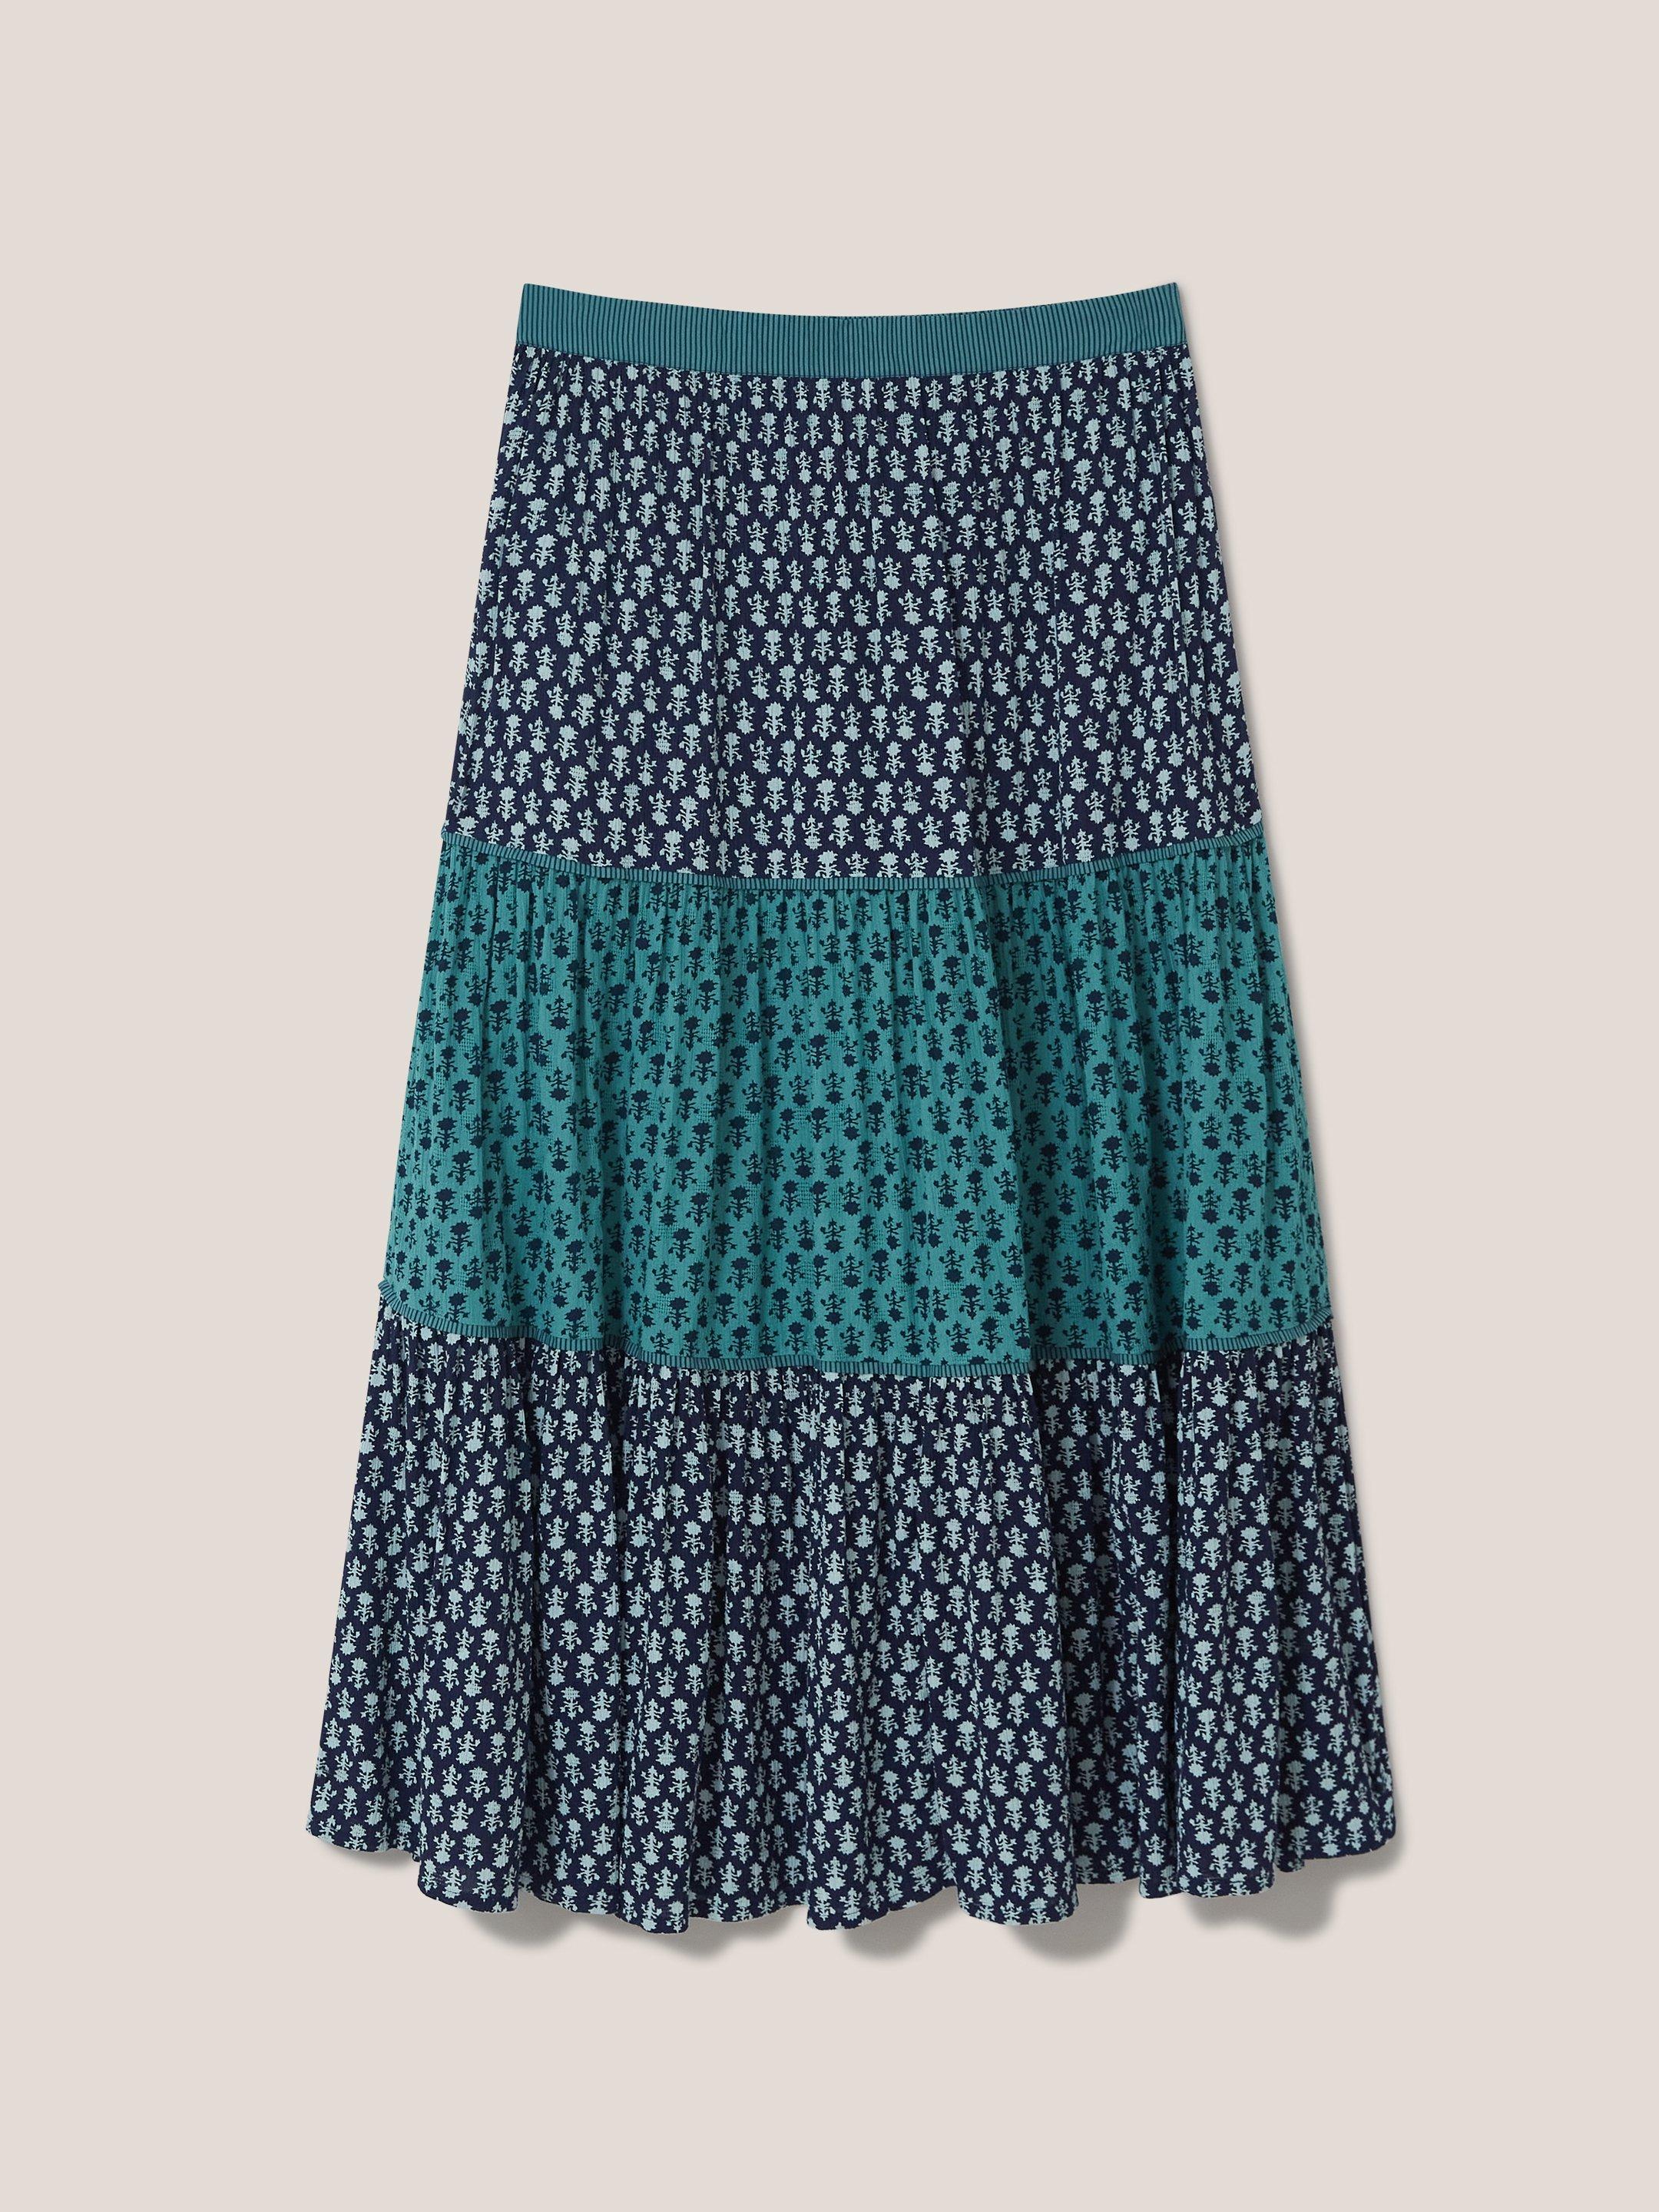 Mabel Mixed Print Midi Skirt in NAVY MULTI - FLAT FRONT